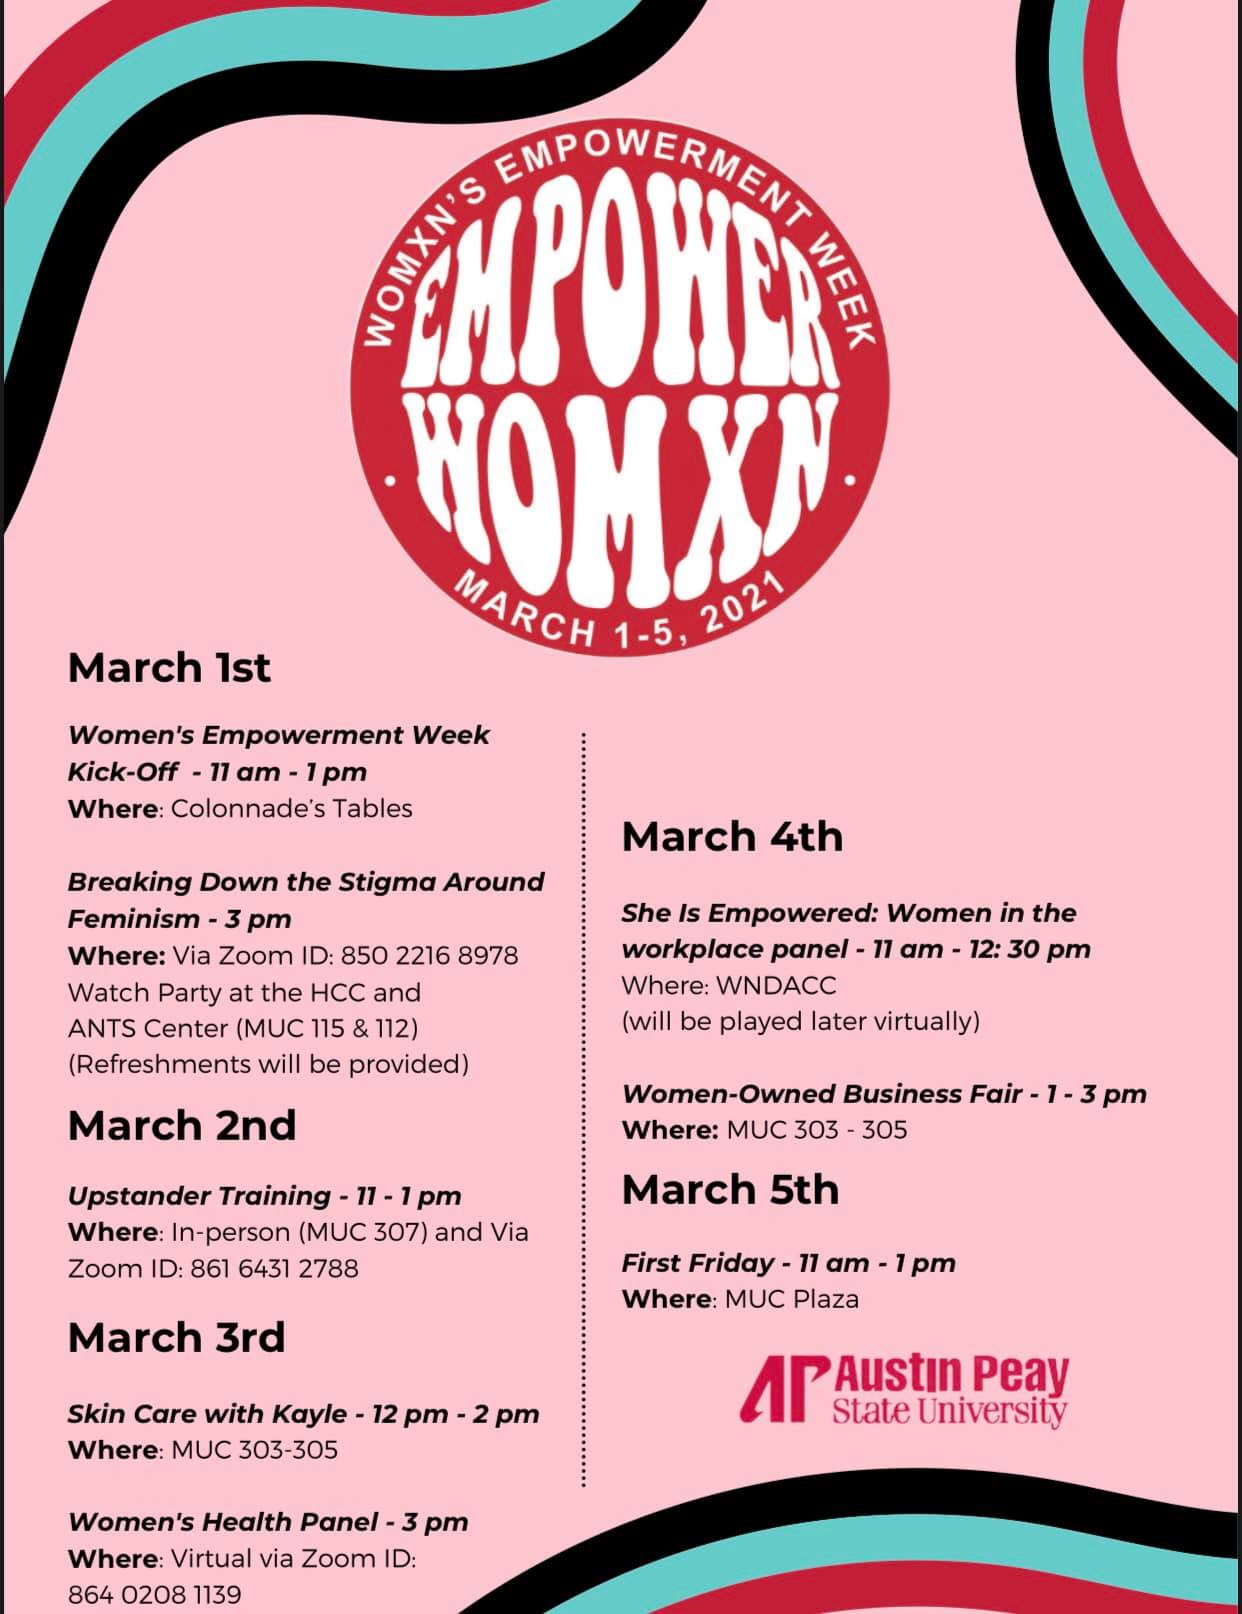 The first week of March will bring a new event to Austin Peay State University – a week devoted to empowering women. The first-ever Womxn’s Empowerment Week will be filled with events for students and employees.  Each day will feature in-person and Zoom programs, such as a local, women-owned business vendor fair, along with various speakers. Visit Austin Peay’s events website for more information about featured events.  Yanaraliz Barnes, coordinator for the Hispanic Cultural Center, and Ashley Kautz, coordinator for Adult, Nontraditional & Transfer Student Center, have worked tirelessly to plan the week. Several campus organizations are collaborating to support the campus-wide event.  “I hope it really sparks conversation and that it not only empowers women, but also sparks conversation relating to women’s issues and barriers women face on campus,” Kautz said.  While Austin Peay has hosted women-related programs and events on campus before, there have never been any quite this large.  “We’ve never done anything that’s disrupted everyday thoughts and the barriers,” Kautz said. “Hopefully this will create a discussion that makes people in the future think a little more about what our students, faculty and staff face who identify as women.”  The spelling of “Womxn” in “Womxn’s Empowerment Week” has a deeper meaning than some may think. The “X” removes the words “man/men” from the word “woman.” This allows the term “womxn” to show that women are not a subcategory of men.  Monday, March 1 – Feminism • Womxn’s Empowerment Week Kick-Off at 11 a.m.-1 p.m. at Morgan University Center (MUC) colonnade tables. Visit the Peaylink event listing for more information. • “Breaking Down the Stigma Around Feminism” panel discussion at 3 p.m. Panelists will be Drs. Nicole Knickmeyer and Jonniann Butterfield. Watch parties will be in MUC Rooms 115 and 112. Click here to attend the Zoom seminar. Visit the Peaylink event listing for more information.  Tuesday, March 2 – Advocacy & Awareness • Upstander Training violence prevention program at 11 a.m.-1 p.m. at MUC Room 307 and on Zoom. Click here to attend the Zoom seminar. Visit the Peaylink event listing for more information.  Wednesday, March 3 – Self-Care • Skin-care with Kayle noon-2 p.m. at MUC Rooms 303-305. Visit the Peaylink event listing for more information. • Women’s Health virtual panel at 3 p.m. on Zoom with Dr. Jessica Fripp hosting. Click here to attend the Zoom seminar. Visit the Peaylink event listing for more information.  Thursday, March 4 – Women in the Workplace • “She is Empowered” women in the workplace panel discussion at 11 a.m.-12:30 p.m. at thw Wilbur N. Daniel African American Cultural Center. Visit the Peaylink event listing for more information. • Woman-Owned Business Fair at 1-3 p.m. at MUC Rooms 303-305. Visit the Peaylink event listing for more information.  Friday, March 5 • First Friday at 11 a.m.-1 p.m. at MUC Plaza.  The events are free and open to Austin Peay students and employees.